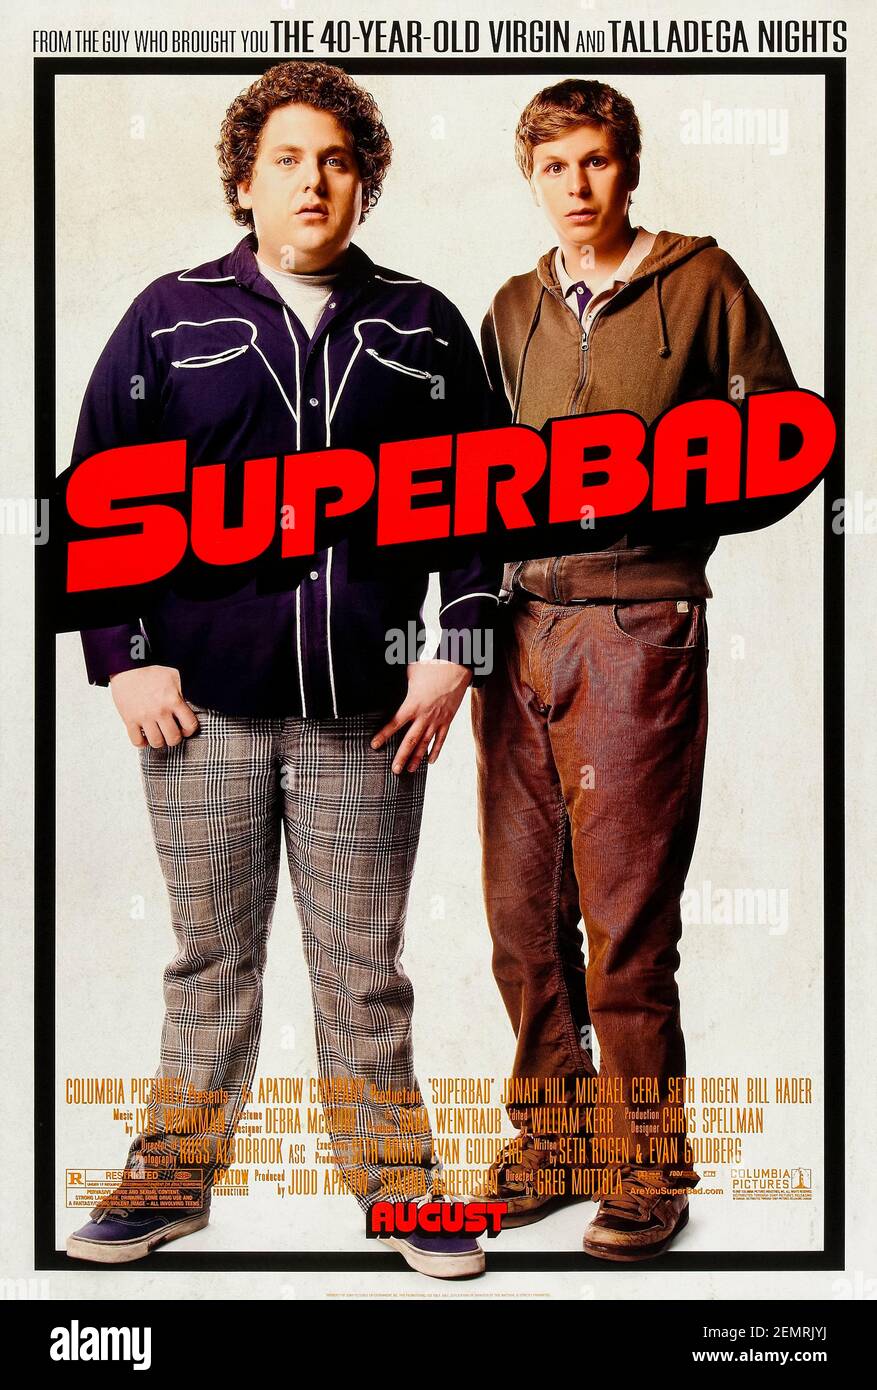 Superbad (2007) directed by Greg Mottola and starring Michael Cera, Jonah Hill and Christopher Mintz-Plasse. Two co-dependent high school seniors are forced to deal with separation anxiety after their plan to stage a booze-soaked party goes awry Stock Photo